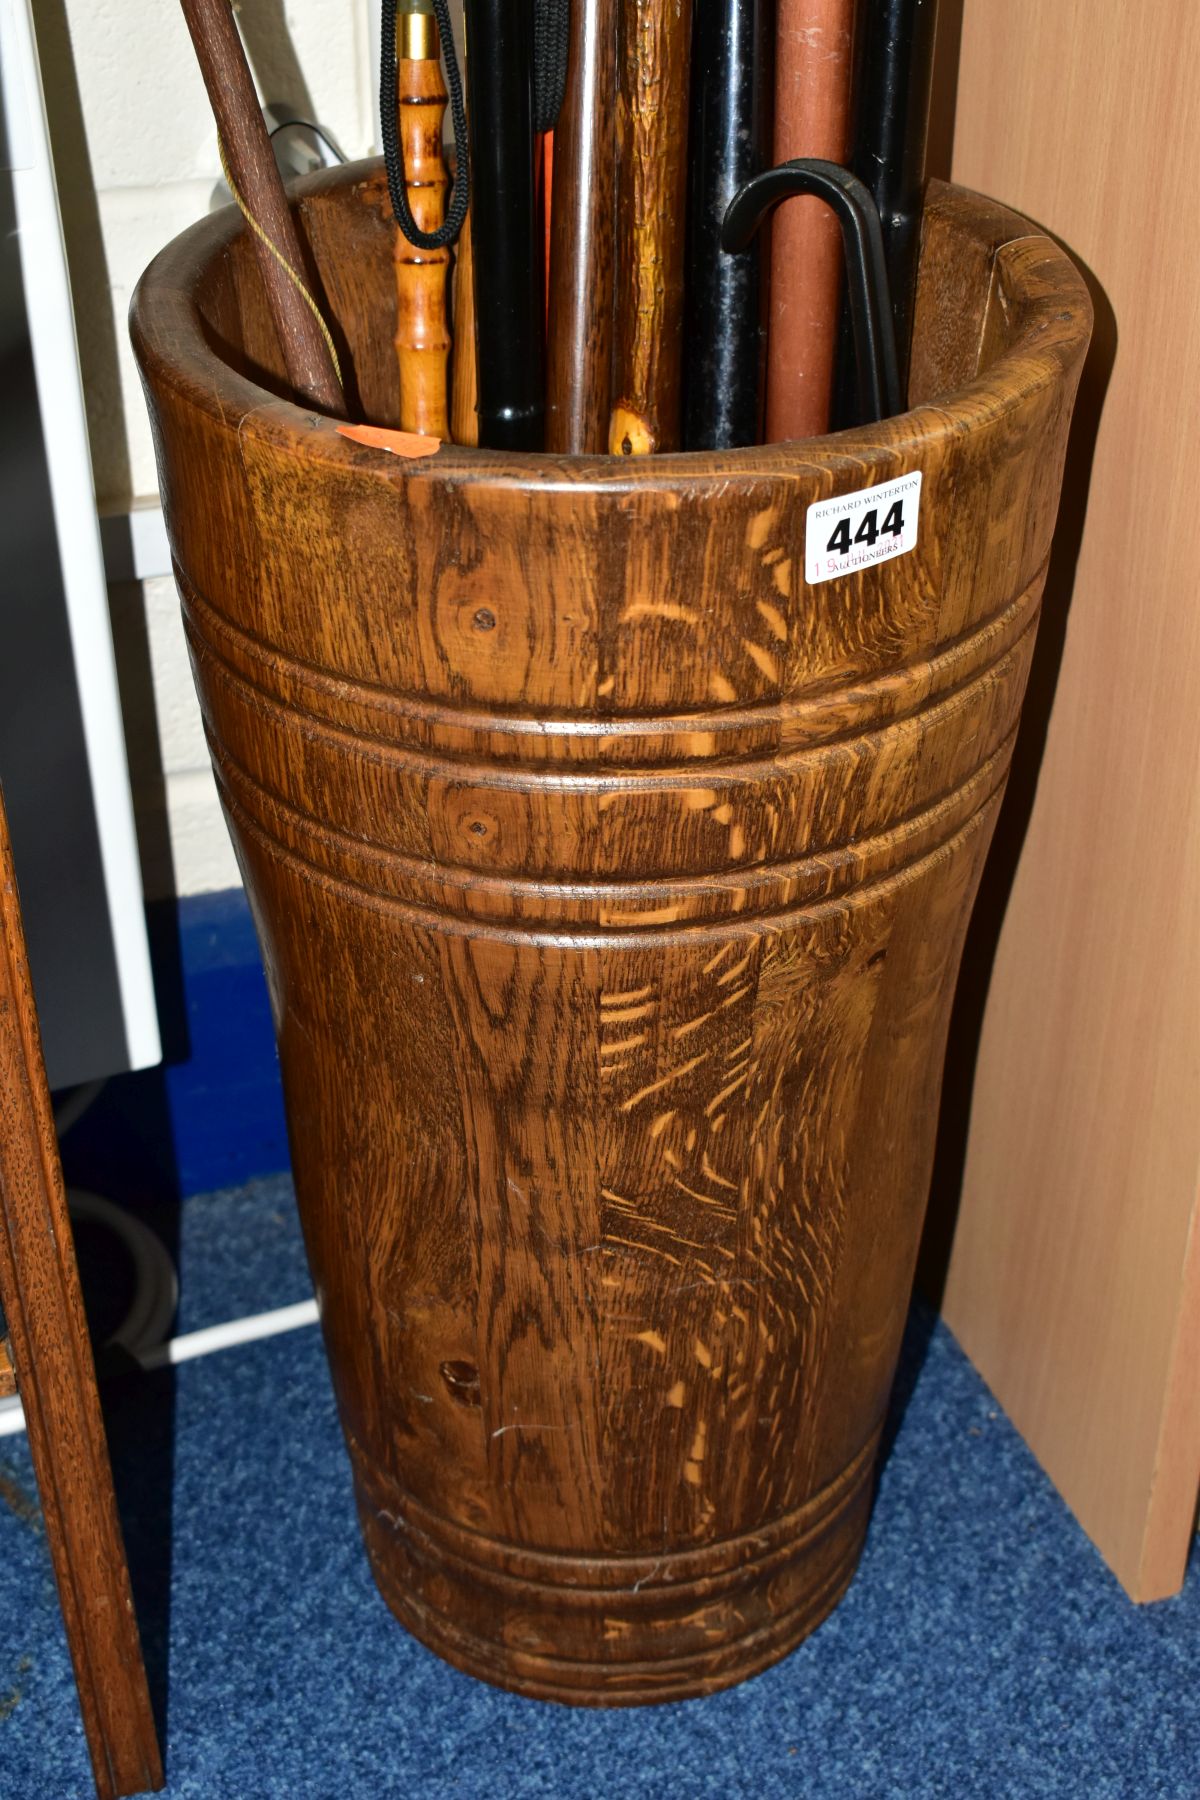 AN OAK STICK STAND OF PANELLED FORM, height 46cm, containing a back scratcher, a large wooden